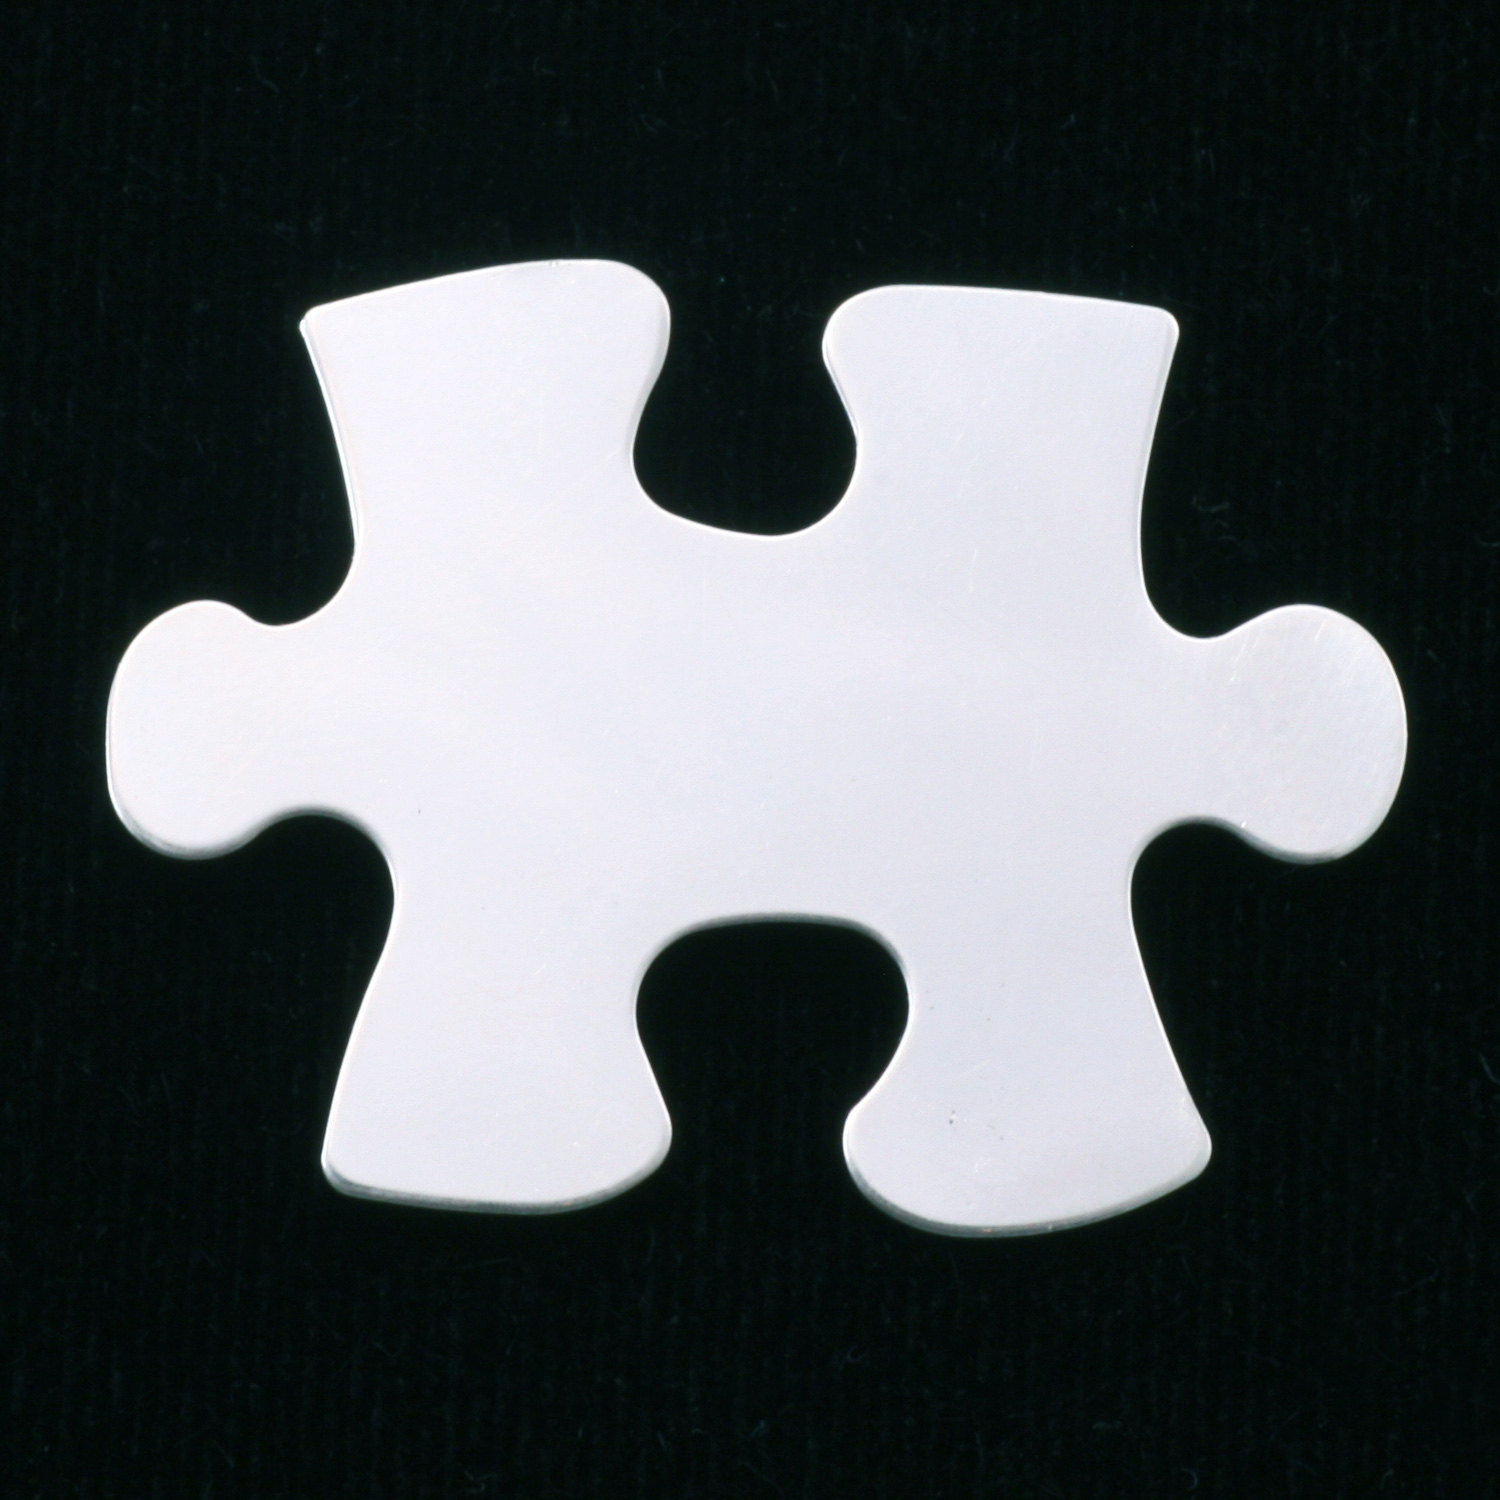 sterling silver jigsaw puzzle piece for metal by JackandJuniper